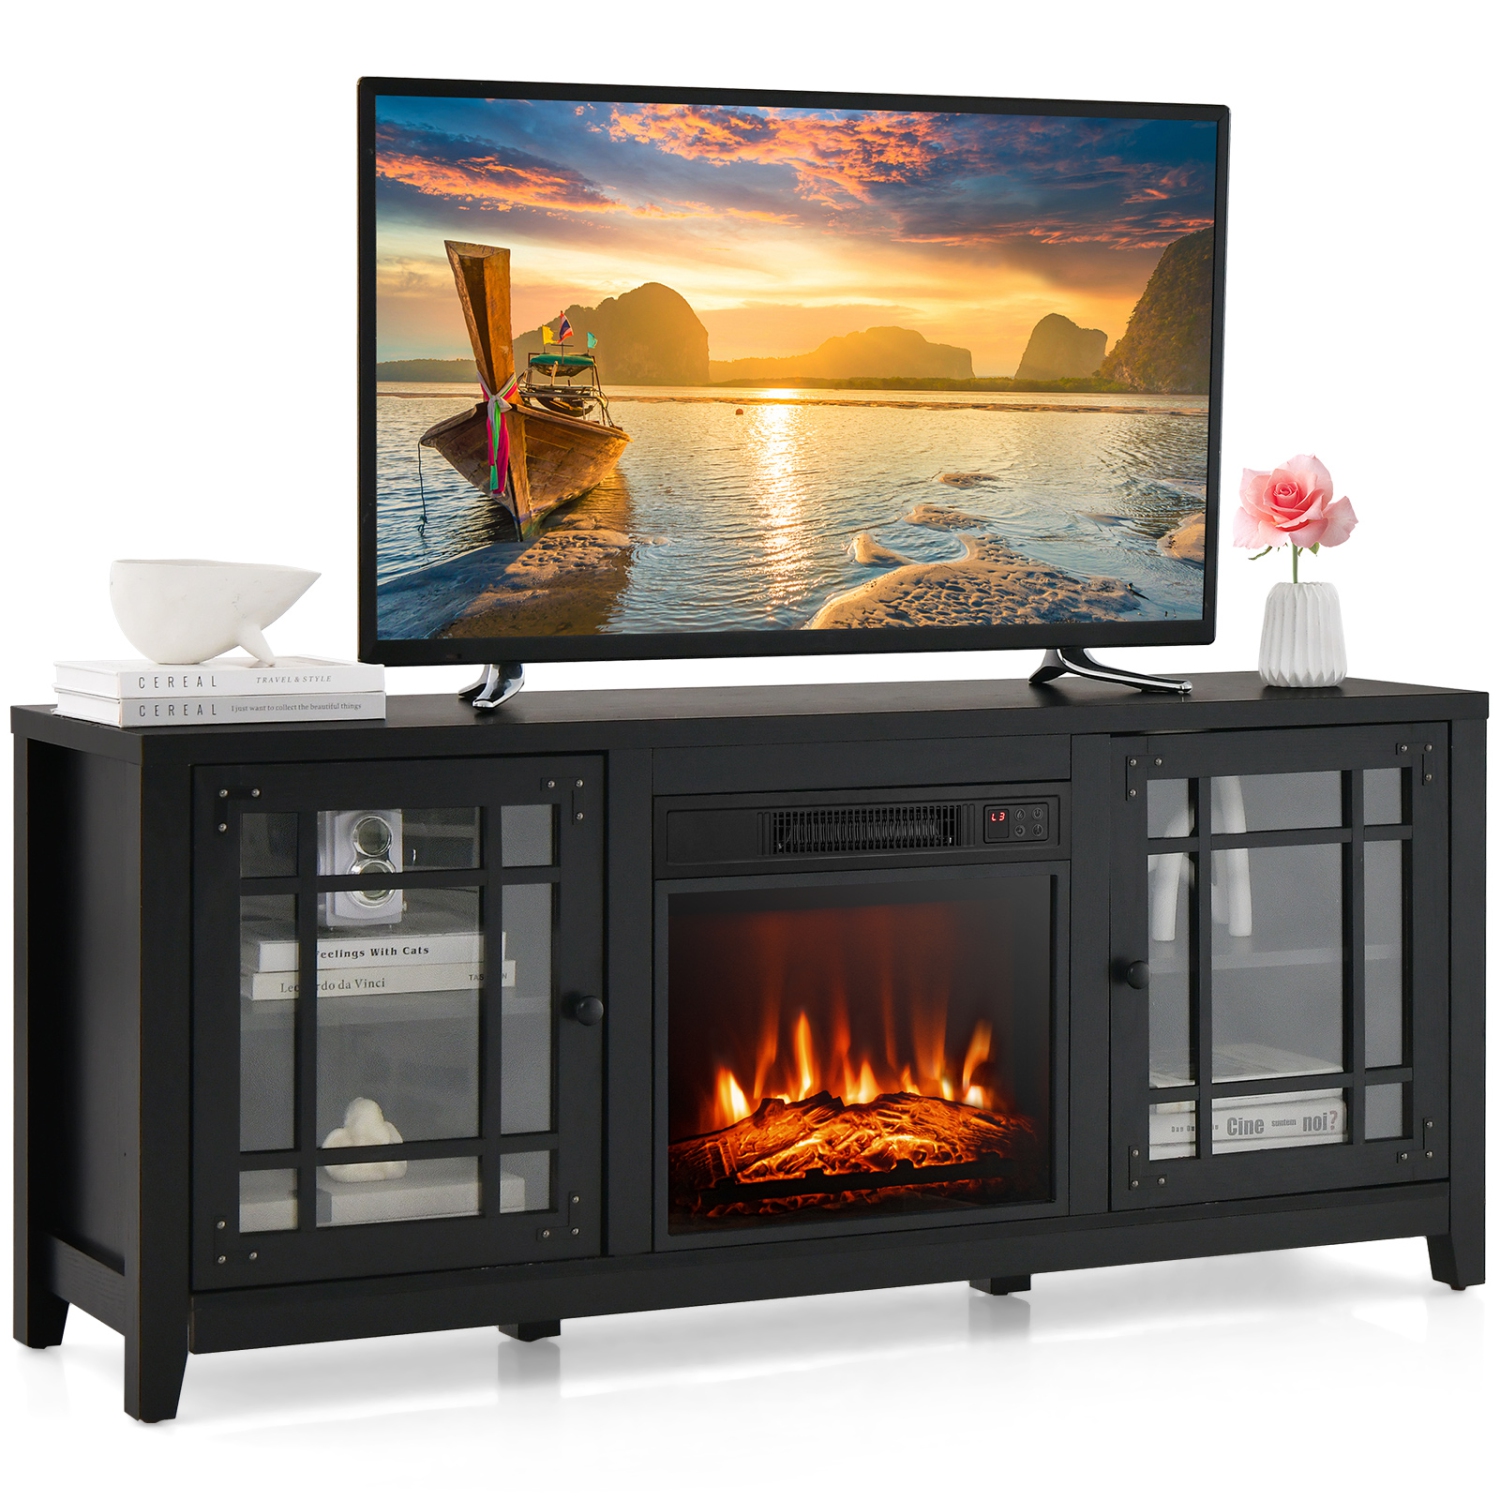 Costway 58 Inches Fireplace TV Stand for TVs up to 65 Inches with 1400W Electric Fireplace Black/Naturl/White